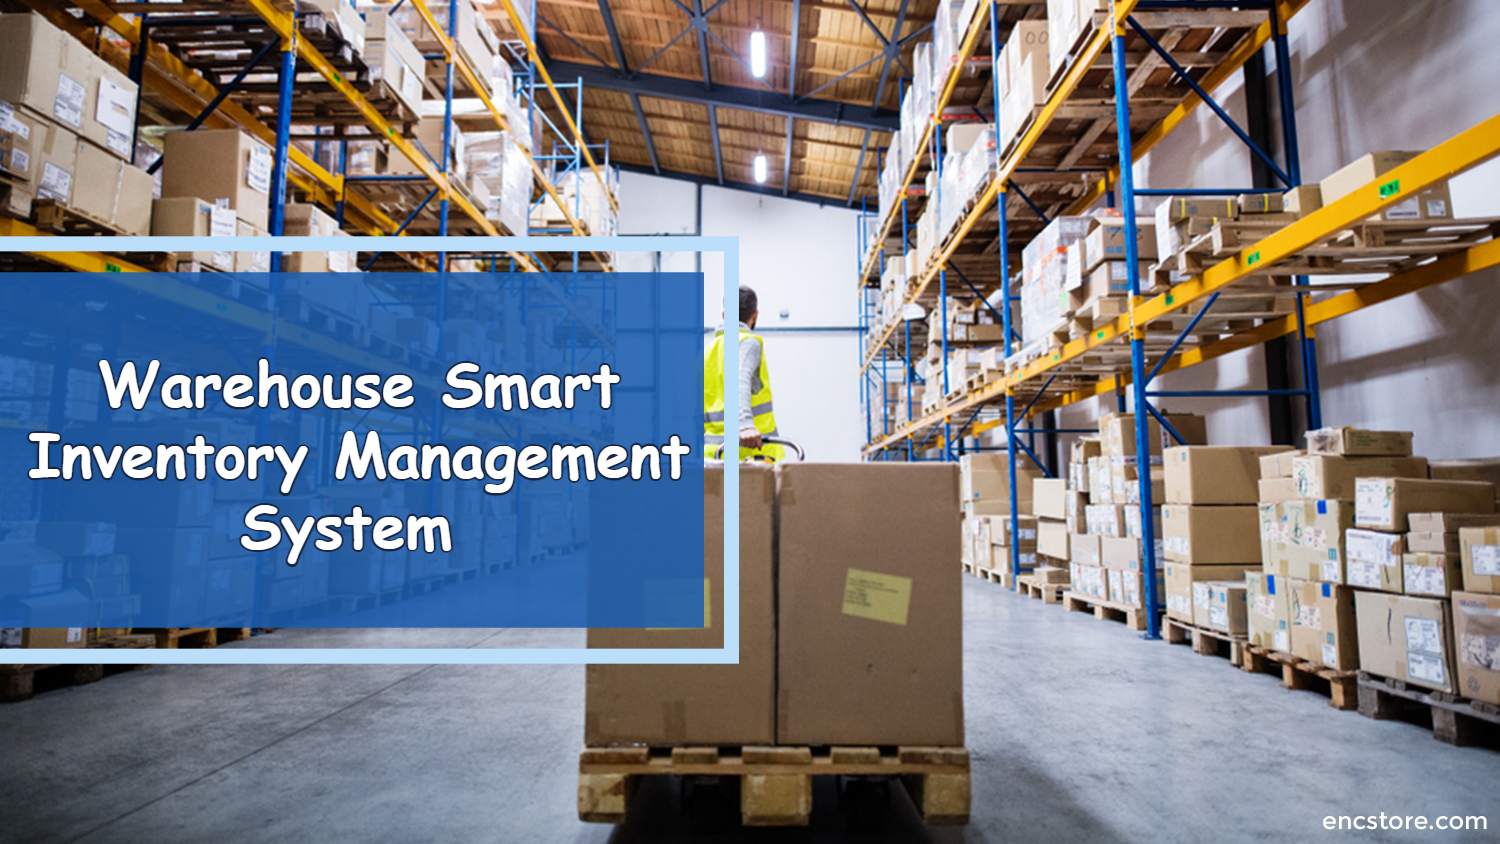 Warehouse Smart Inventory Management System